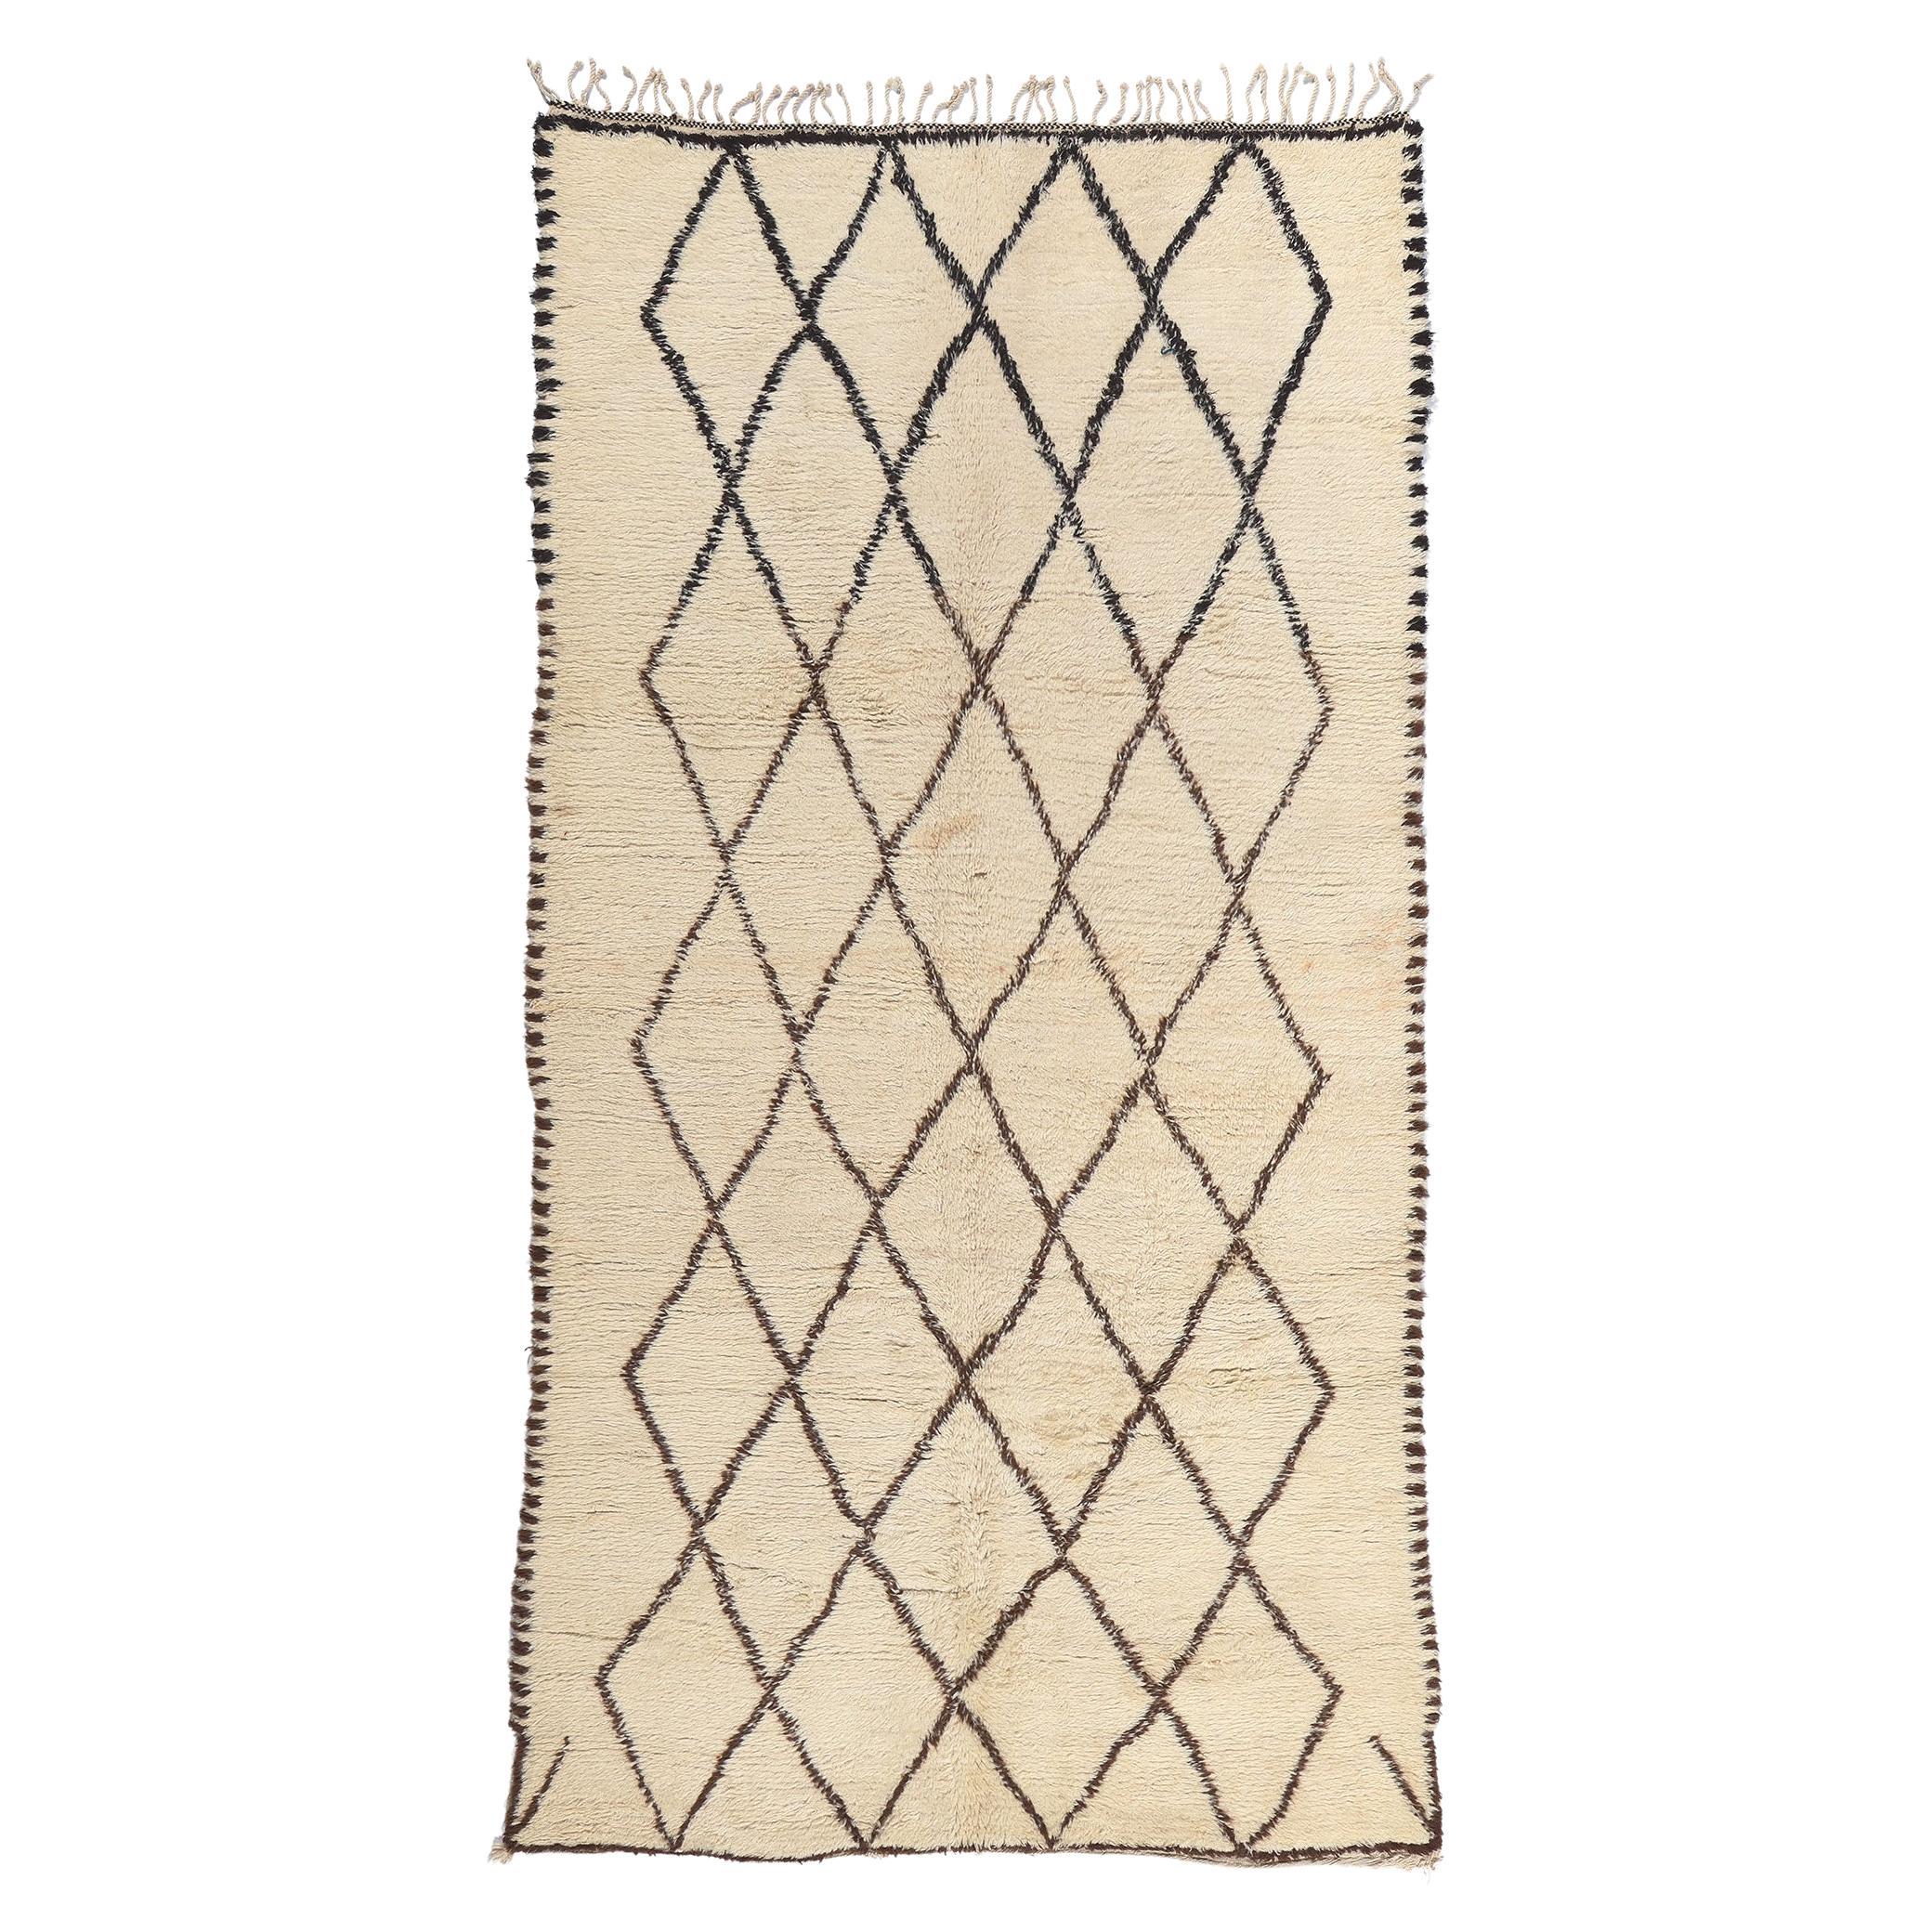 Vintage Moroccan Beni Ourain Rug, Mid-Century Modern Style Meets Shibui